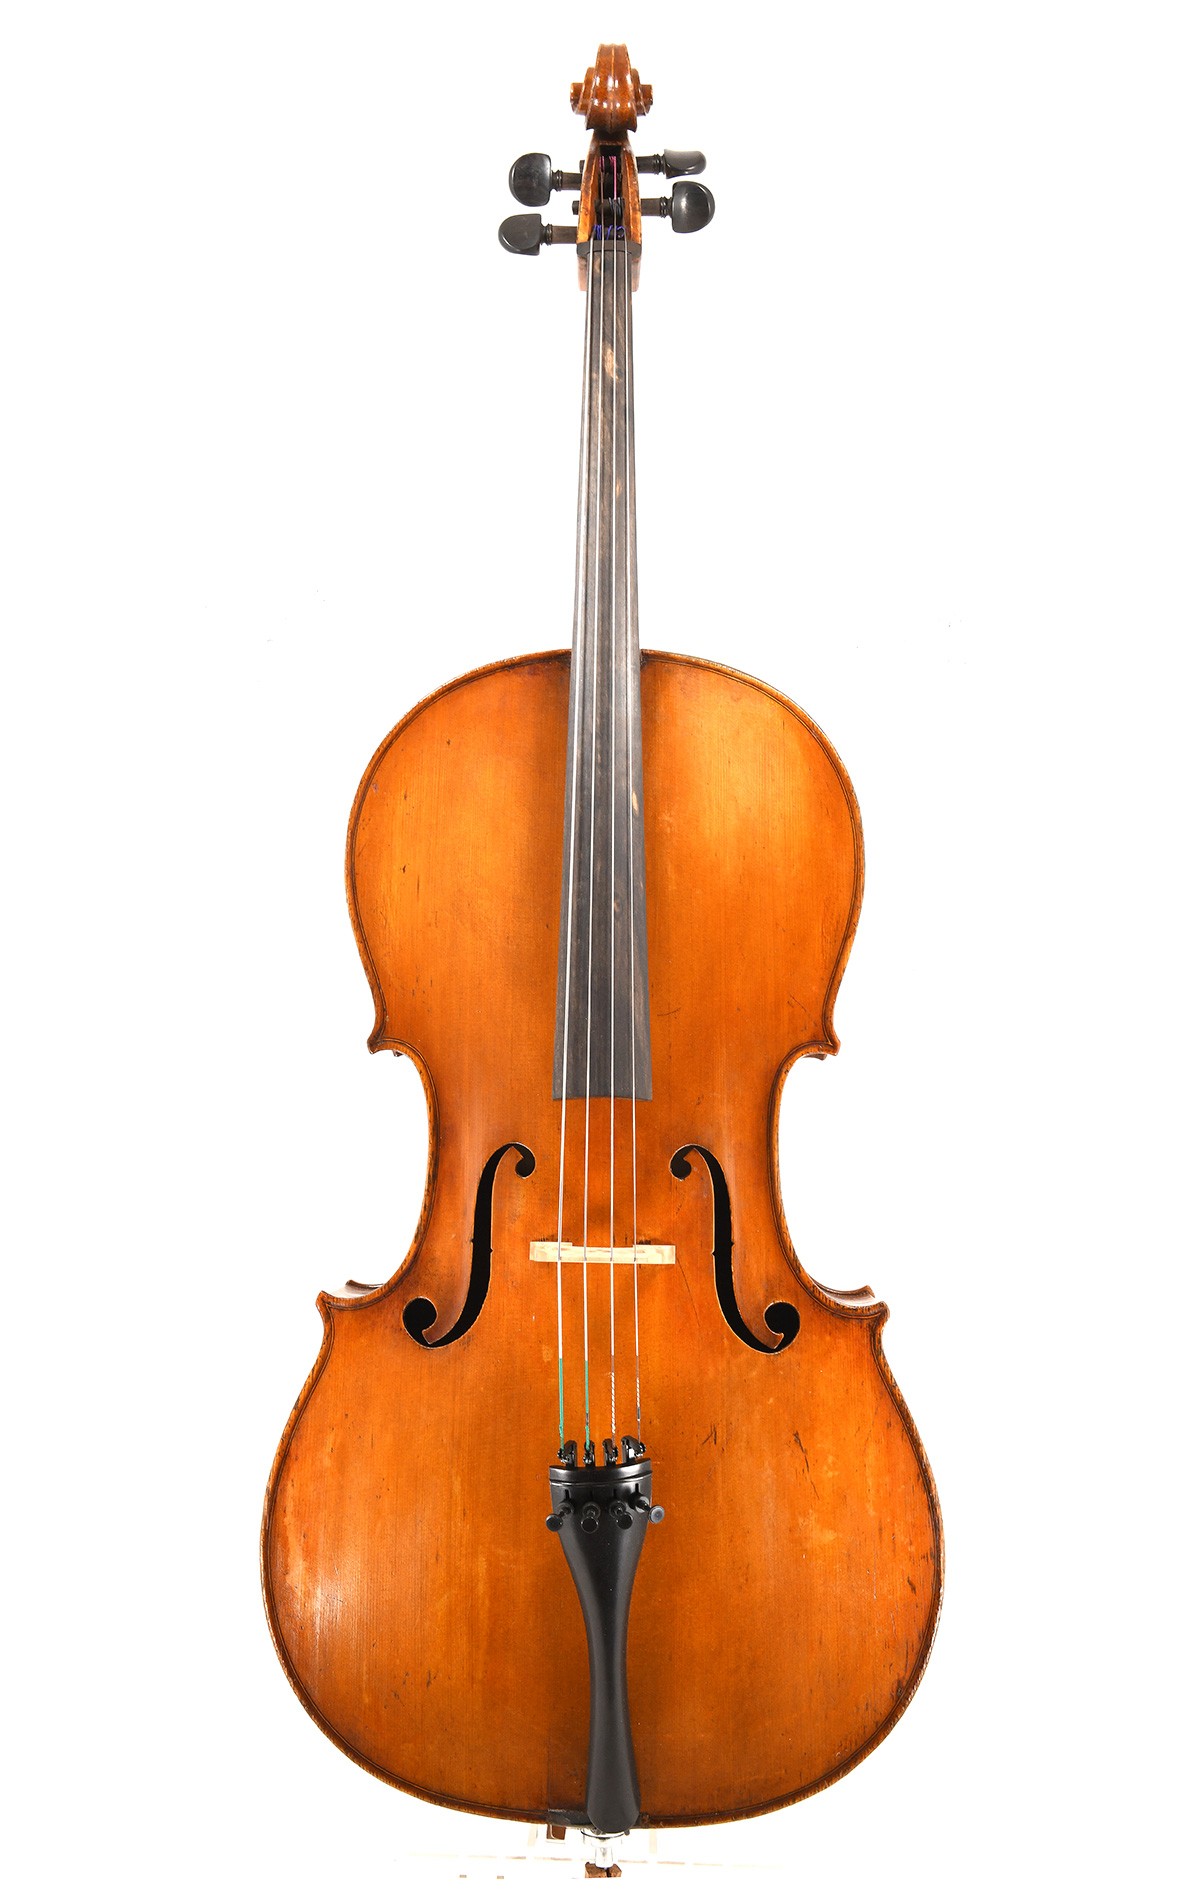 Antique French cello, approx. 1880 - probably Justin Derazey 